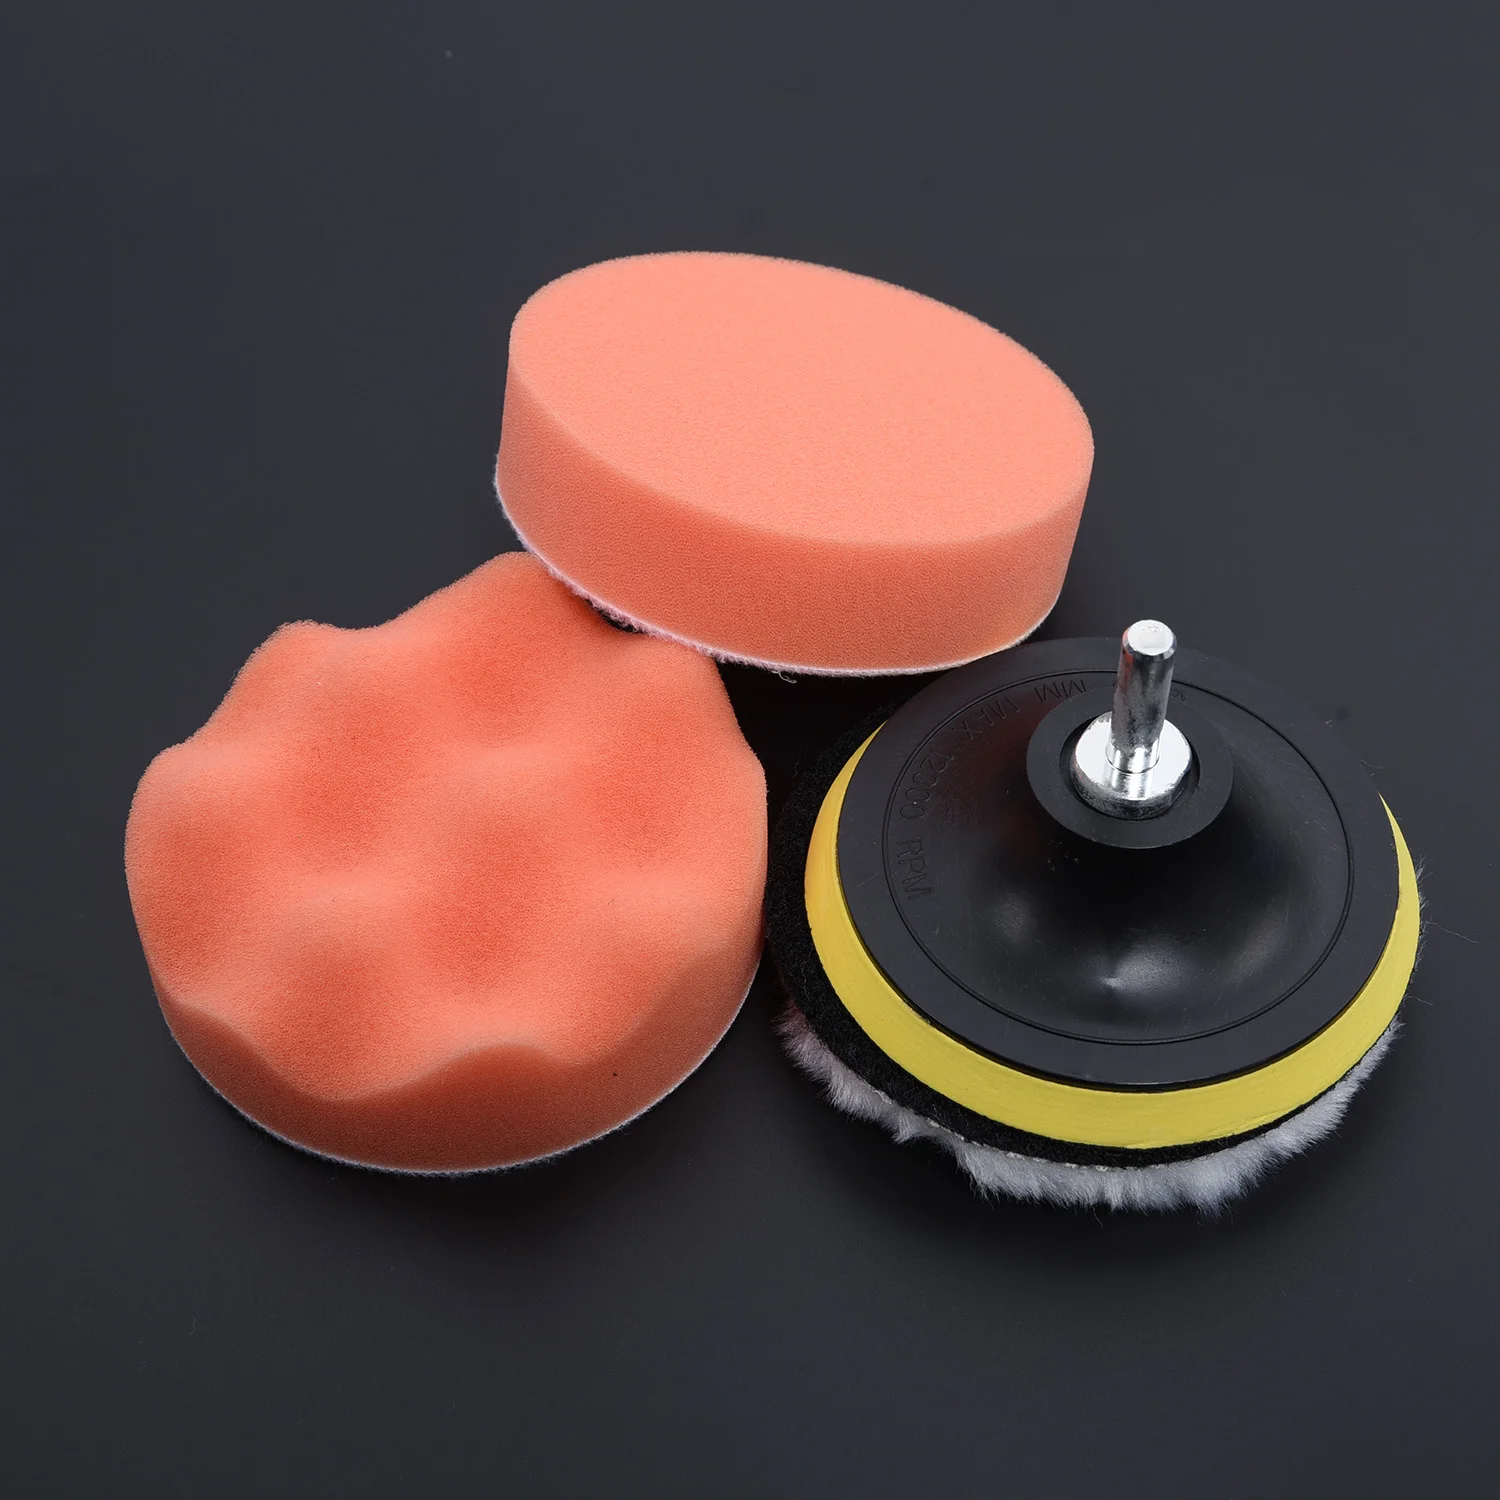 Pad Sponge Adapter Car Polishing Kit Cleaning Compound Foam Auto Buffing Polisher Drill Sander Washing Waxing Tools 1pc 3 7inch self adhesive buffing waxing pad sponge polishing foam pads polishing pad for ro da car polisher car repair tools